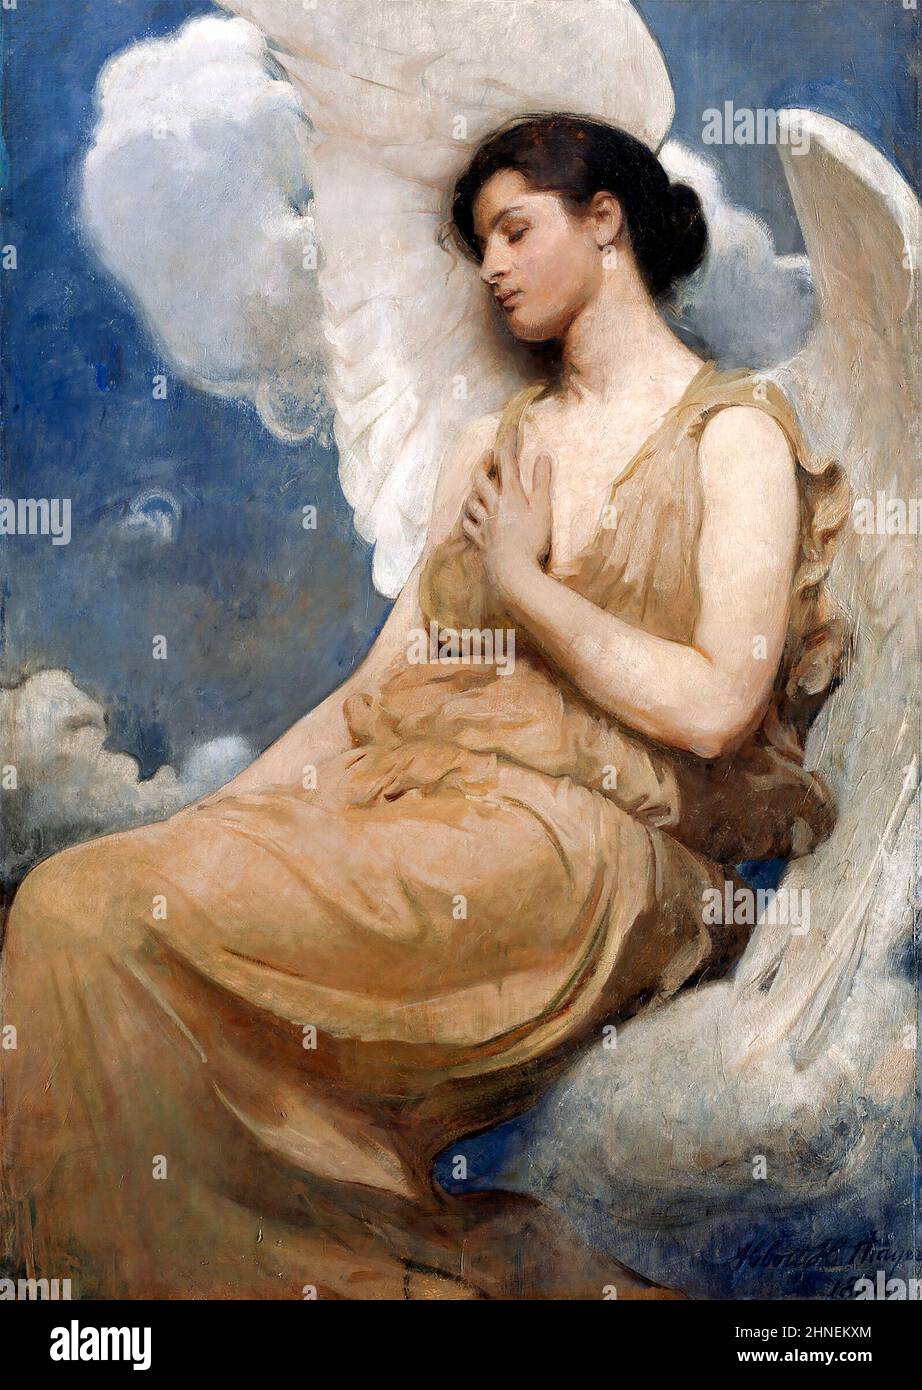 Winged Figure by the American artist, Abbott Handerson Thayer (1849-1921), oil on canvas, 1889 Stock Photo